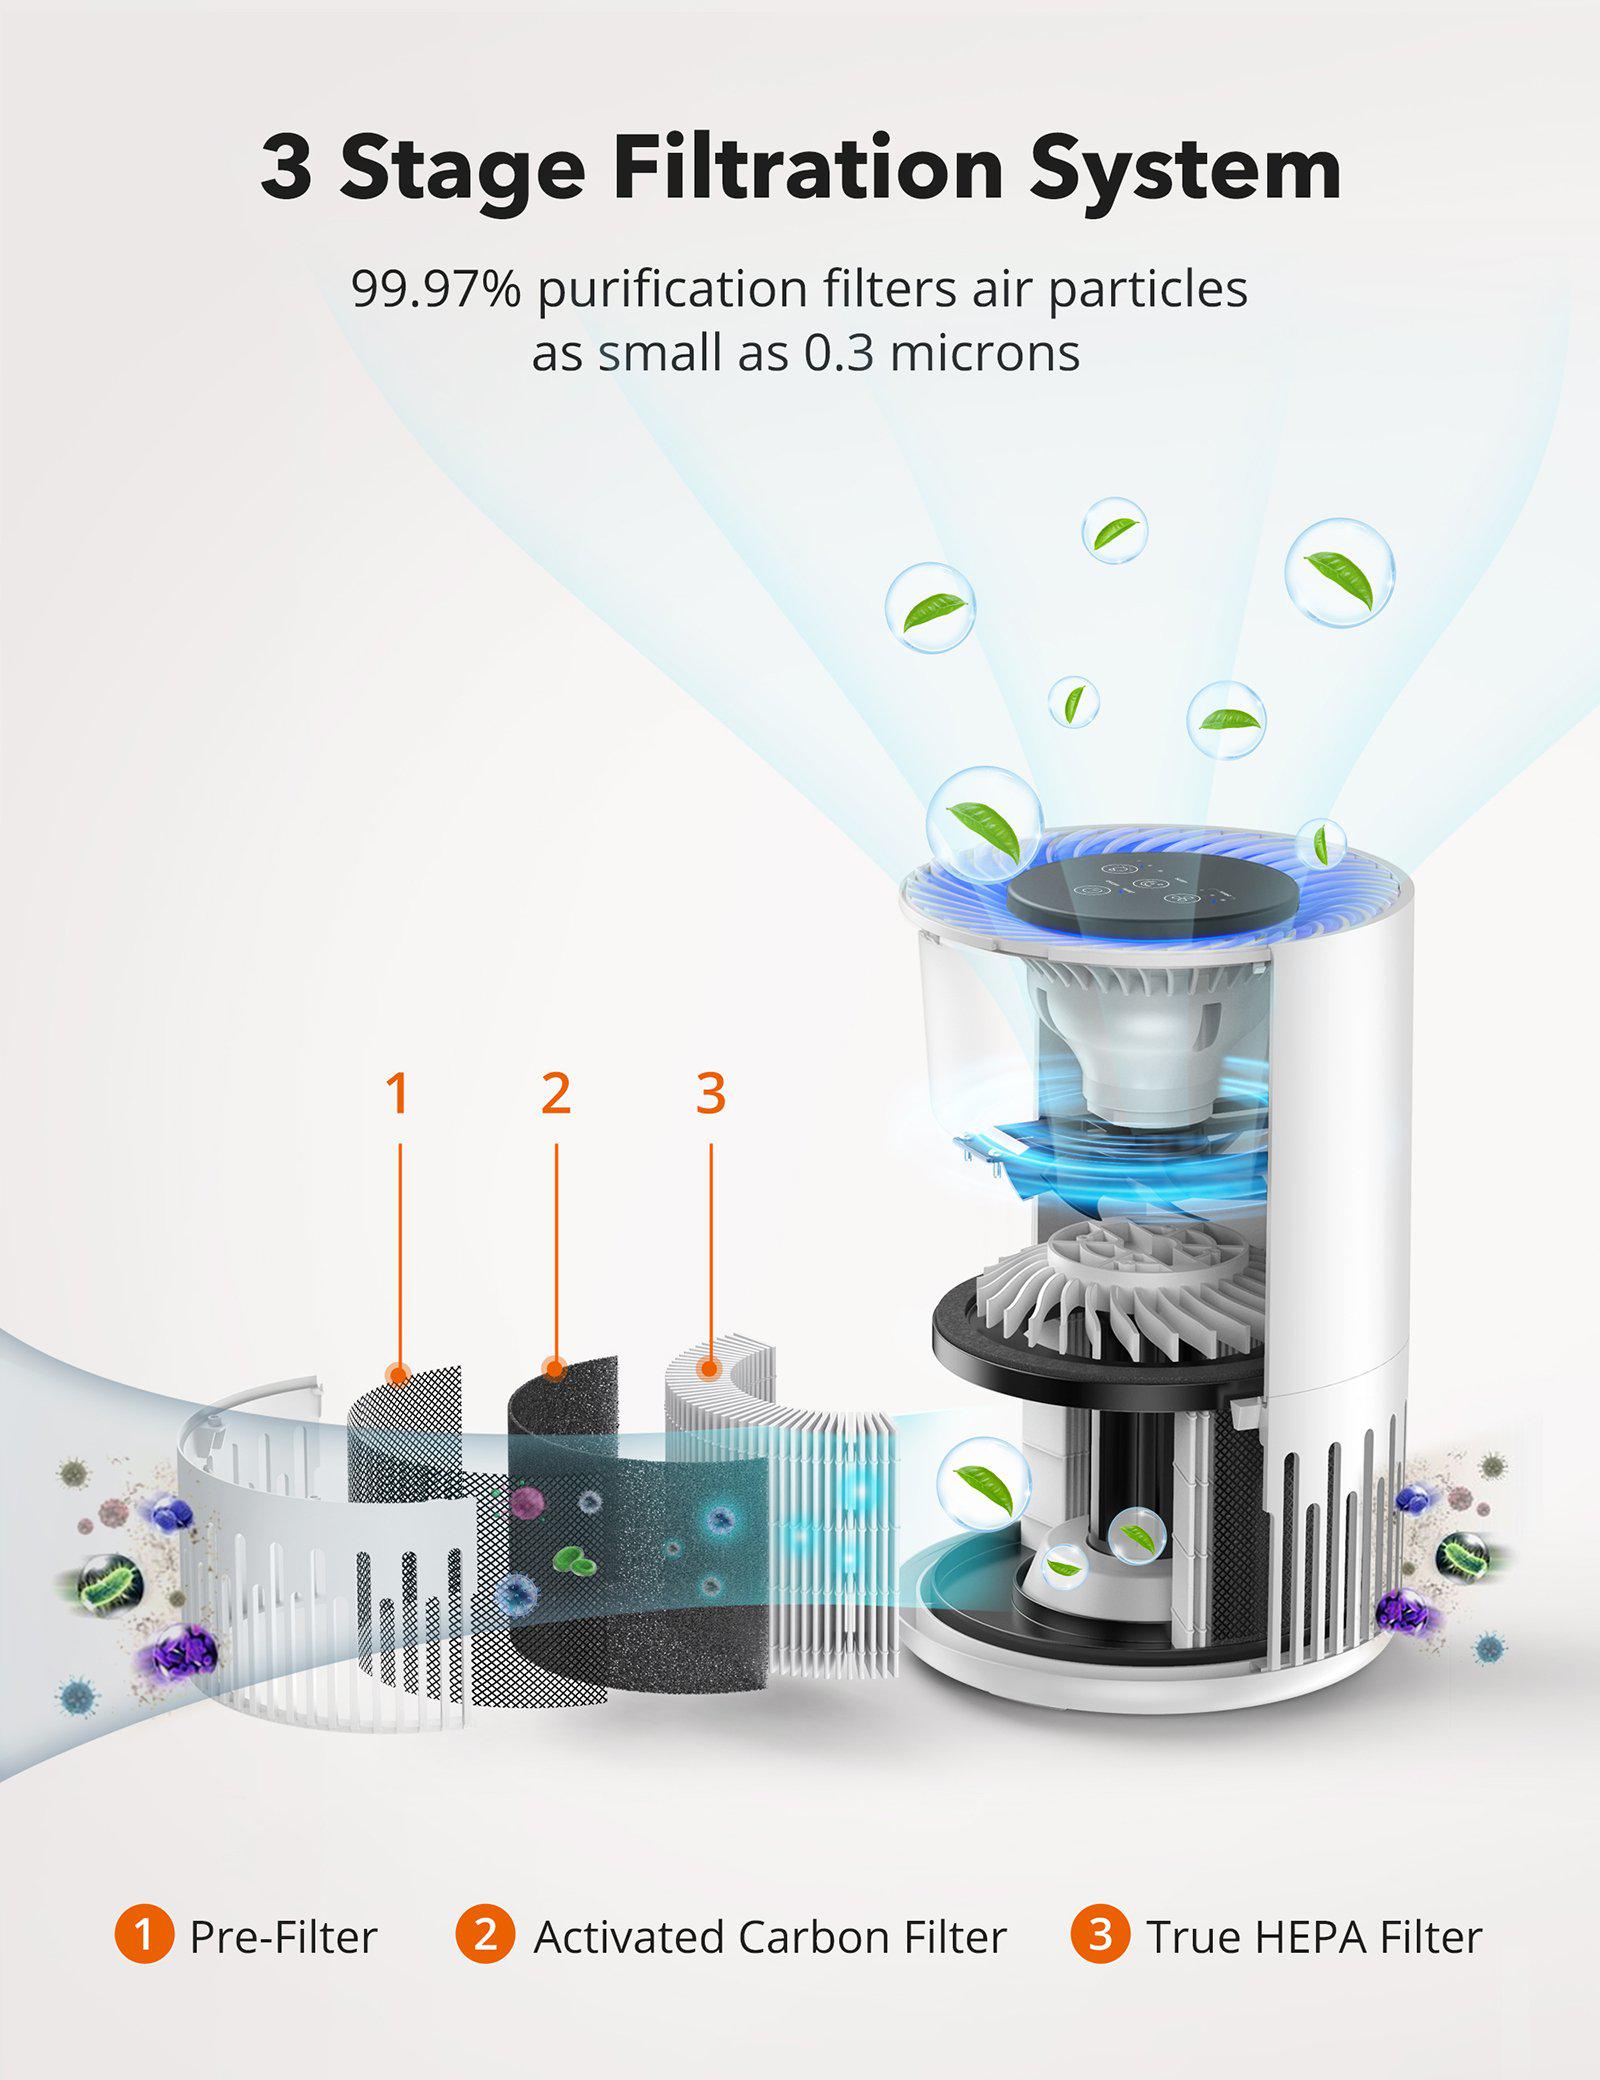 Air purifier filters